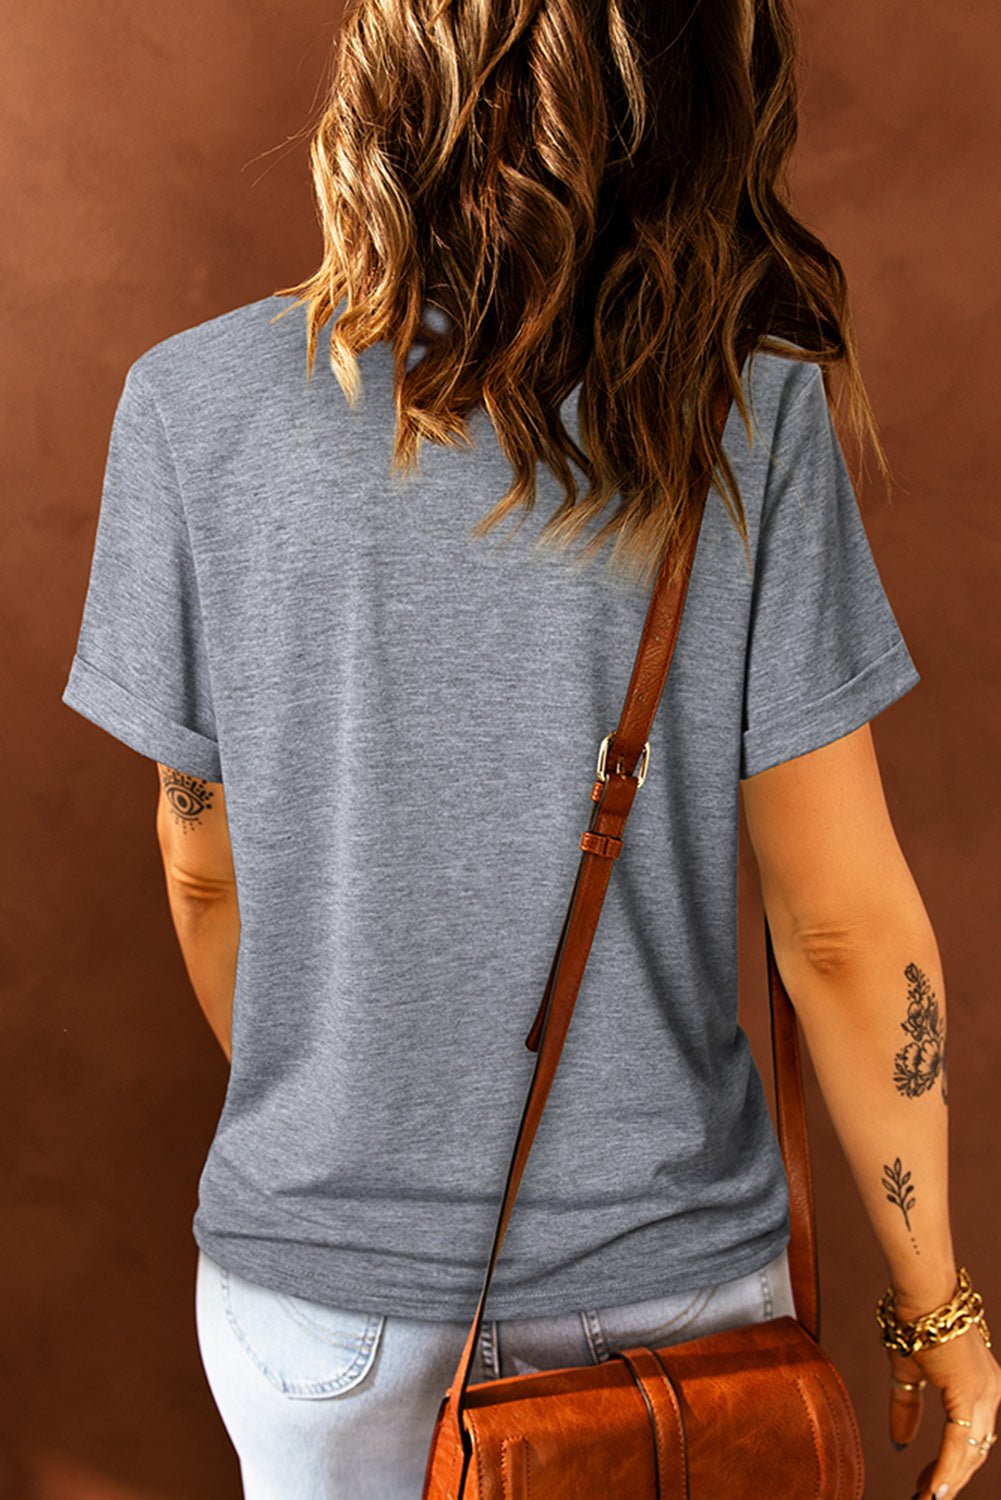 Beauty in Simplicity - Embrace your Inner Rebel with our "I'm Not Getting Ready Today" Graphic Tee. Indulge in Ultimate Comfort and Style with this Timeless Garment that will Remind You of Your Beauty and Power Every Day! - Guy Christopher